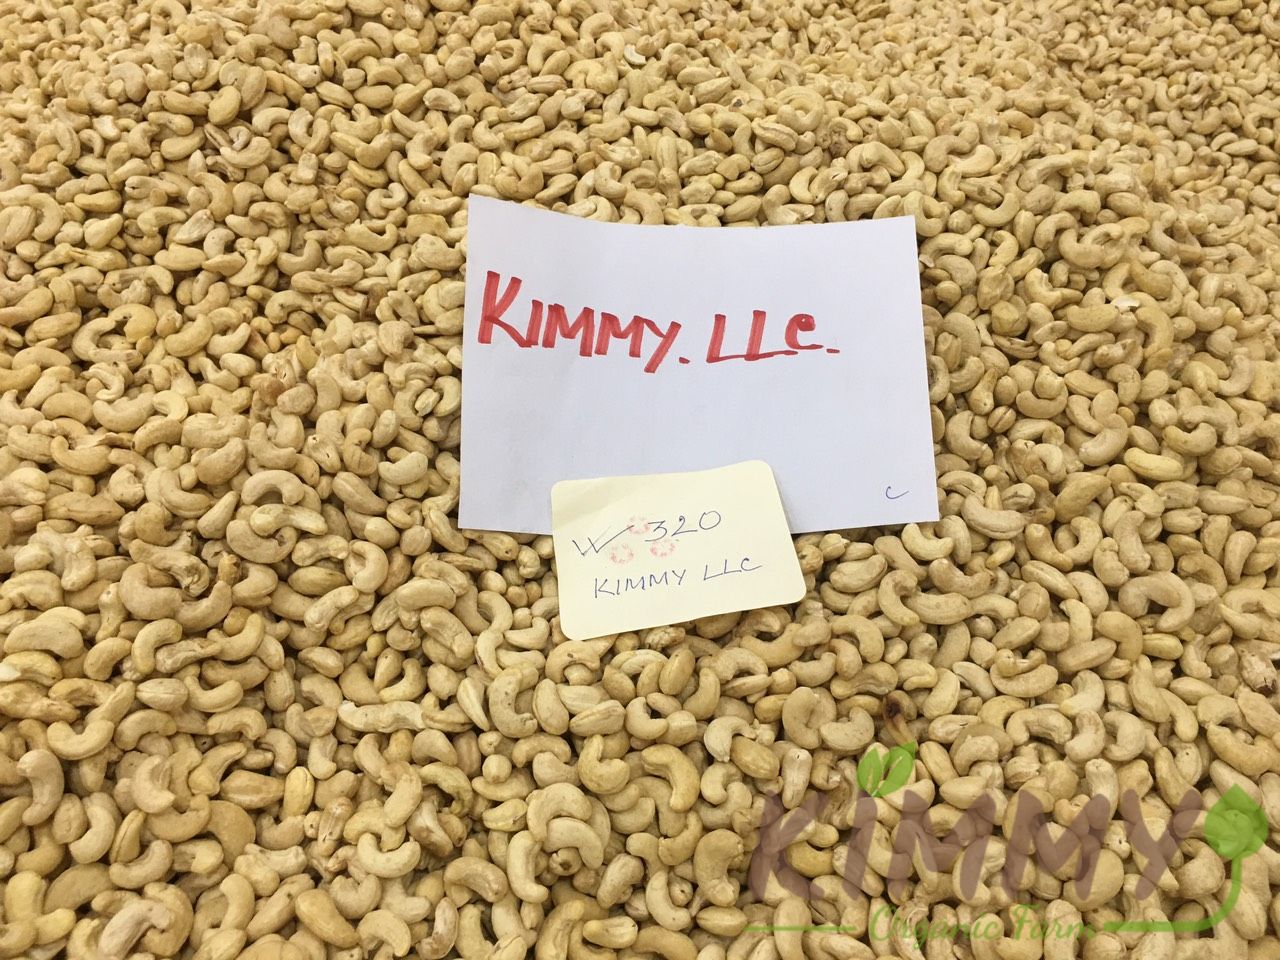 Vietnam W320 Cashew Nut White Whole Cashews High-Quality Ready For Export - Raw image of W320 From Our Cashew Factory!-13